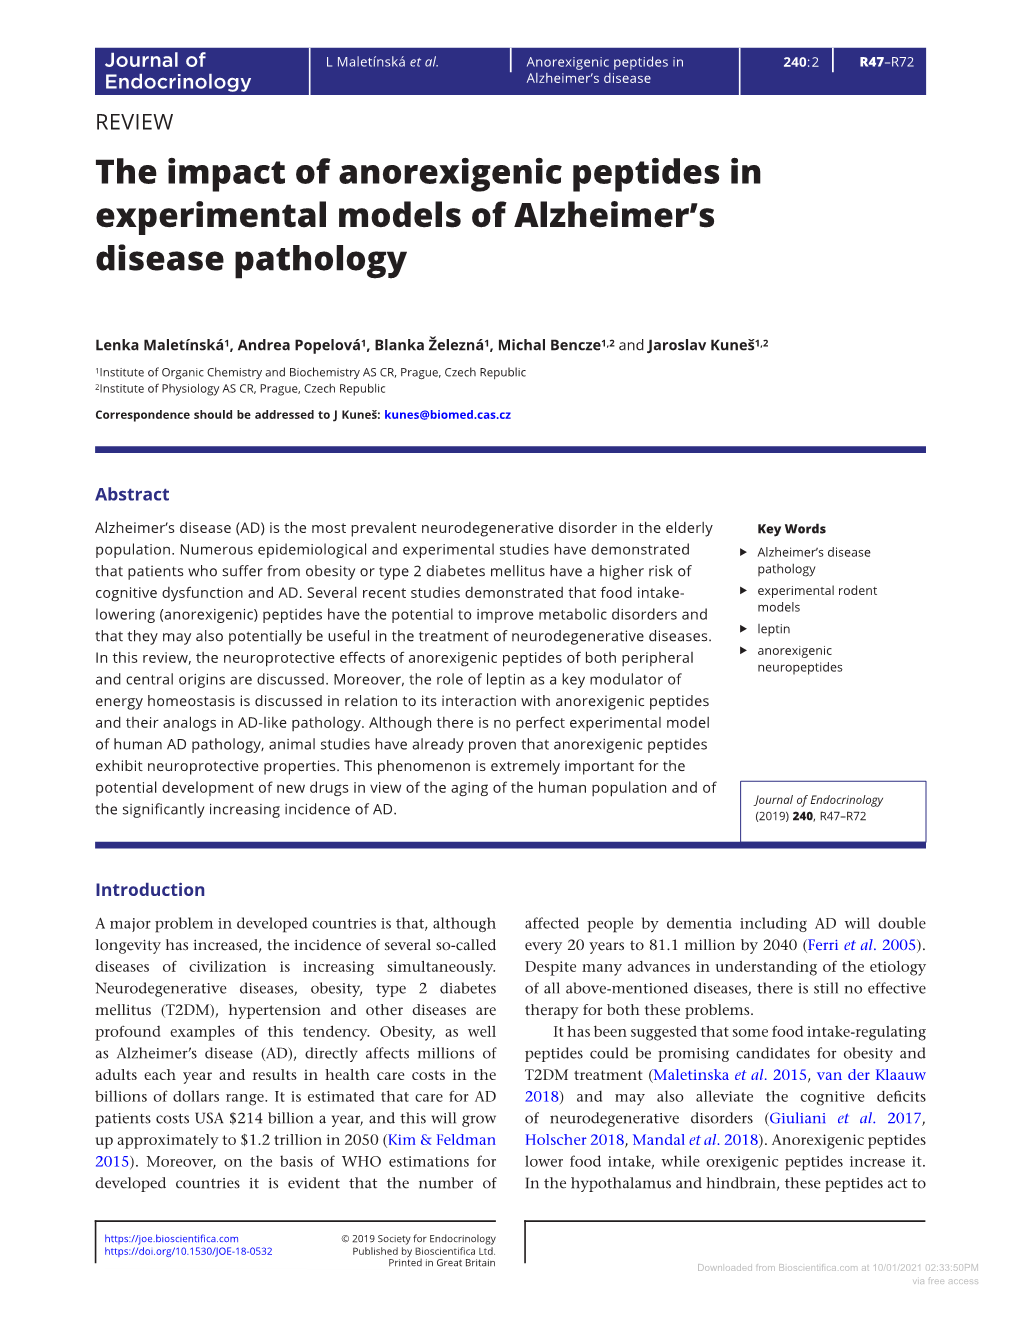 The Impact of Anorexigenic Peptides in Experimental Models of Alzheimer's Disease Pathology